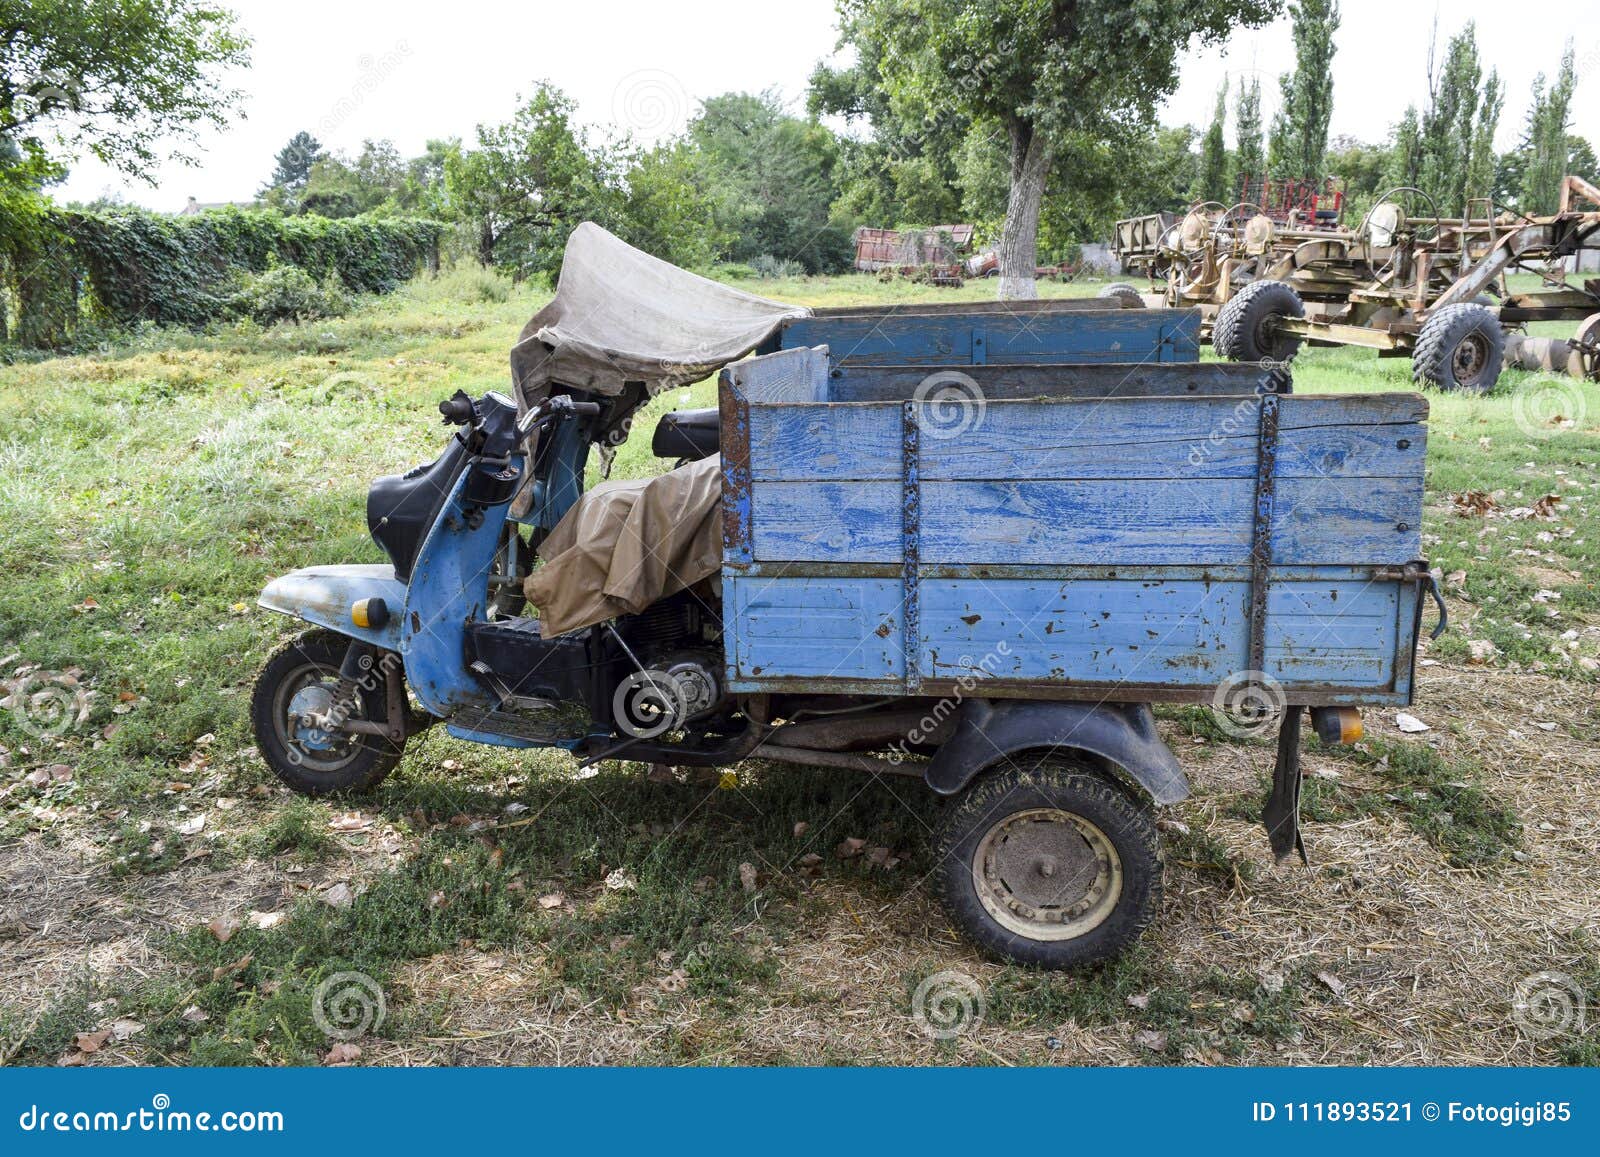 Scooter Ant. Old Soviet Motor Scooter on Three Wheels with a Cart Stock  Image - Image of memory, graves: 111893521